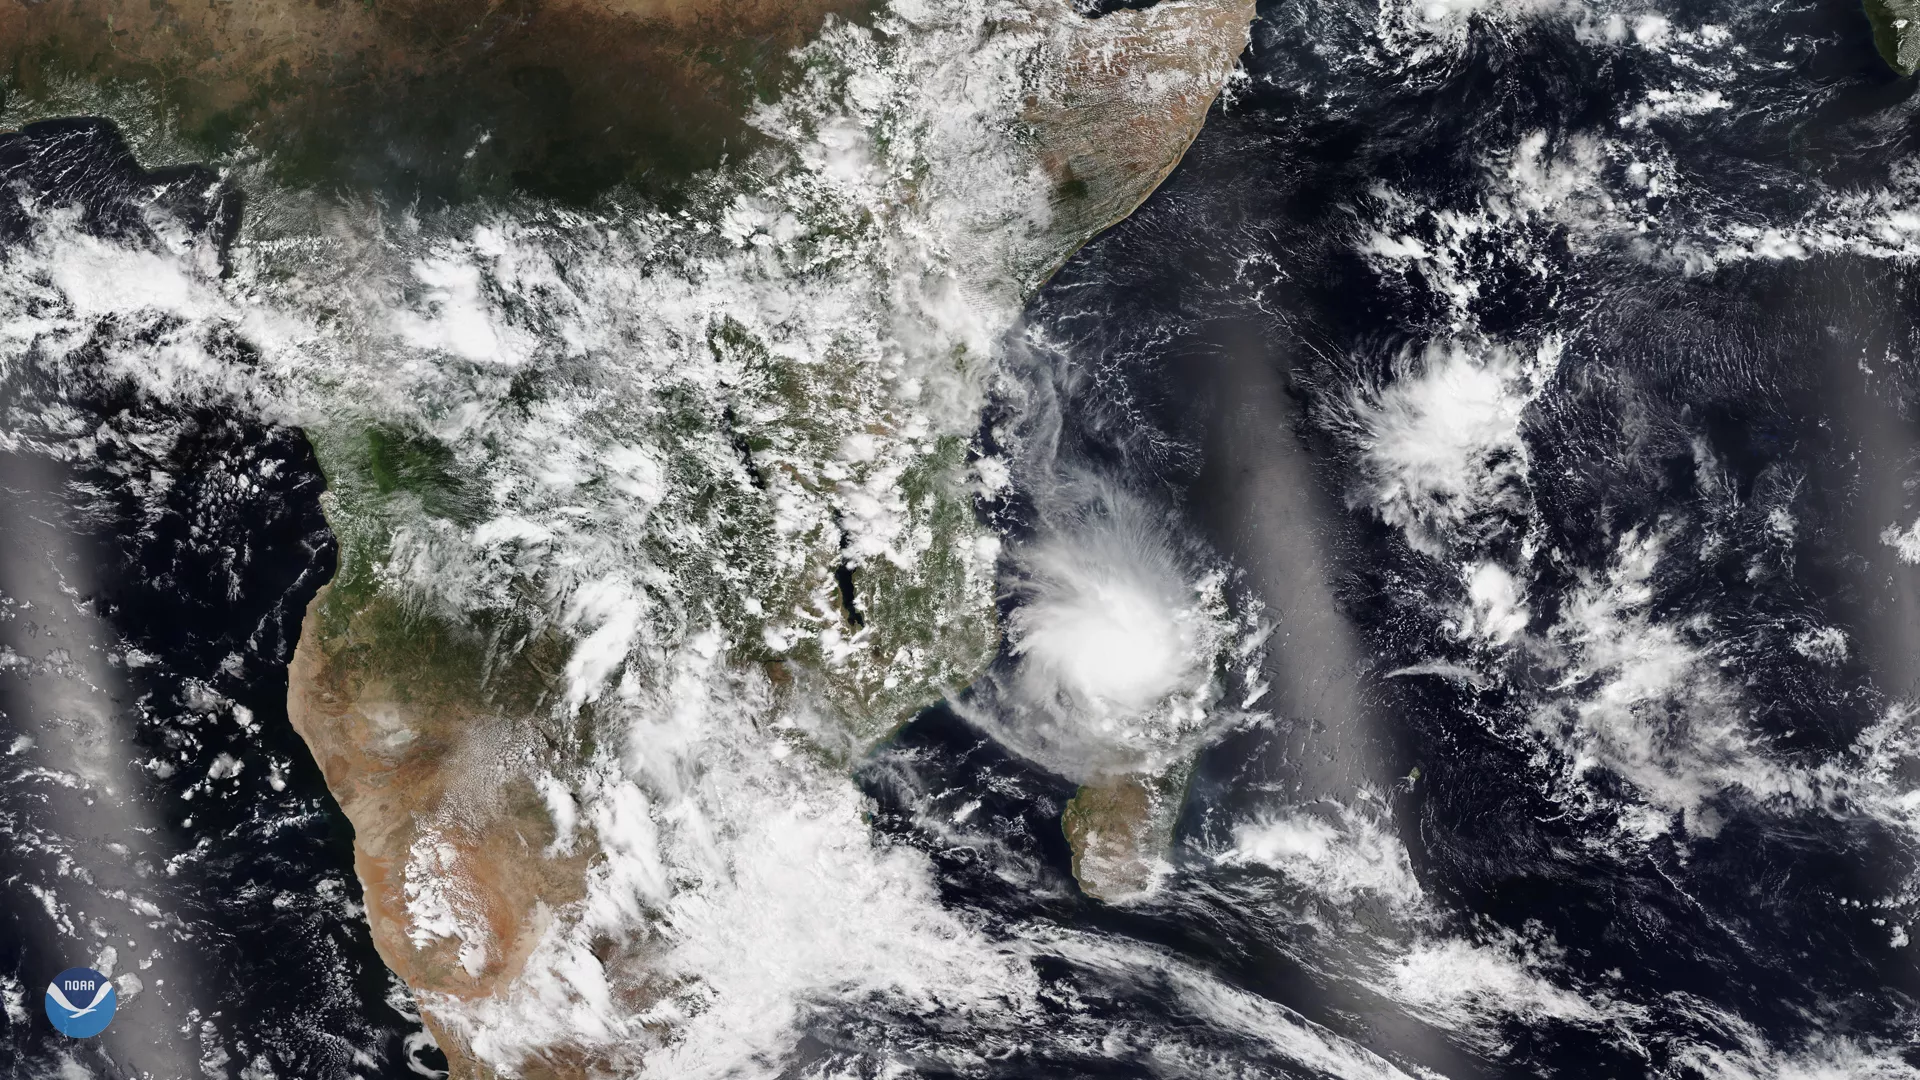 NOAA-20 True Color imagery of Tropical Cyclone Belna as it made landfall at Boeny, Madagascar on Dec. 9, 2019.